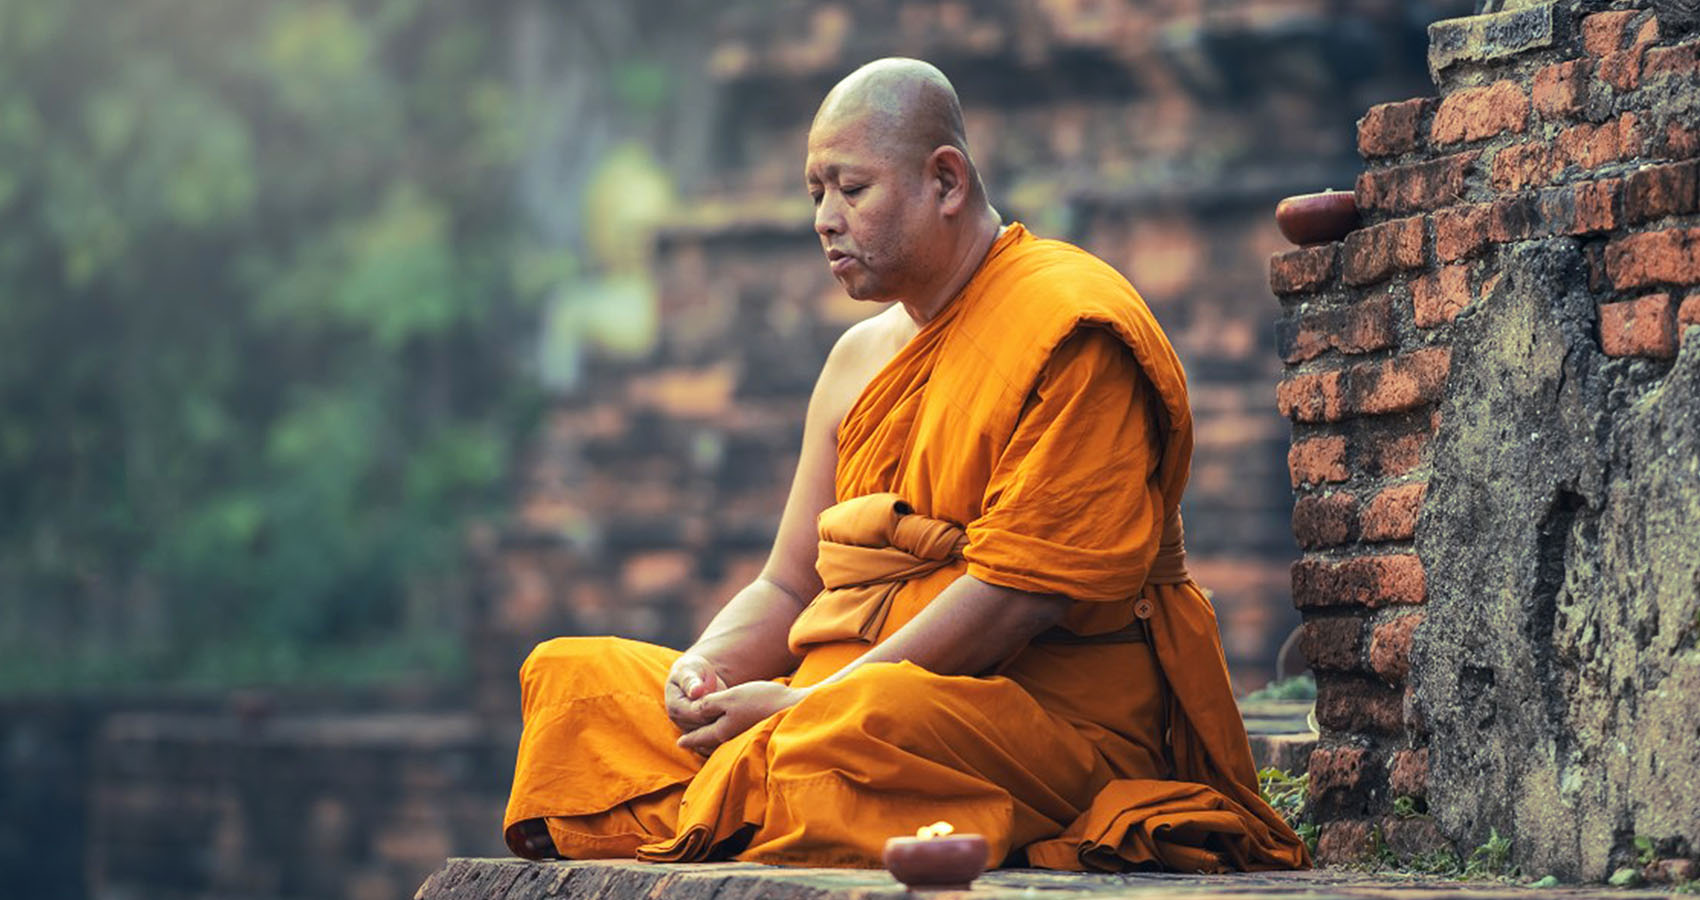 urban legends that turned out to be true - mindfulness buddhism